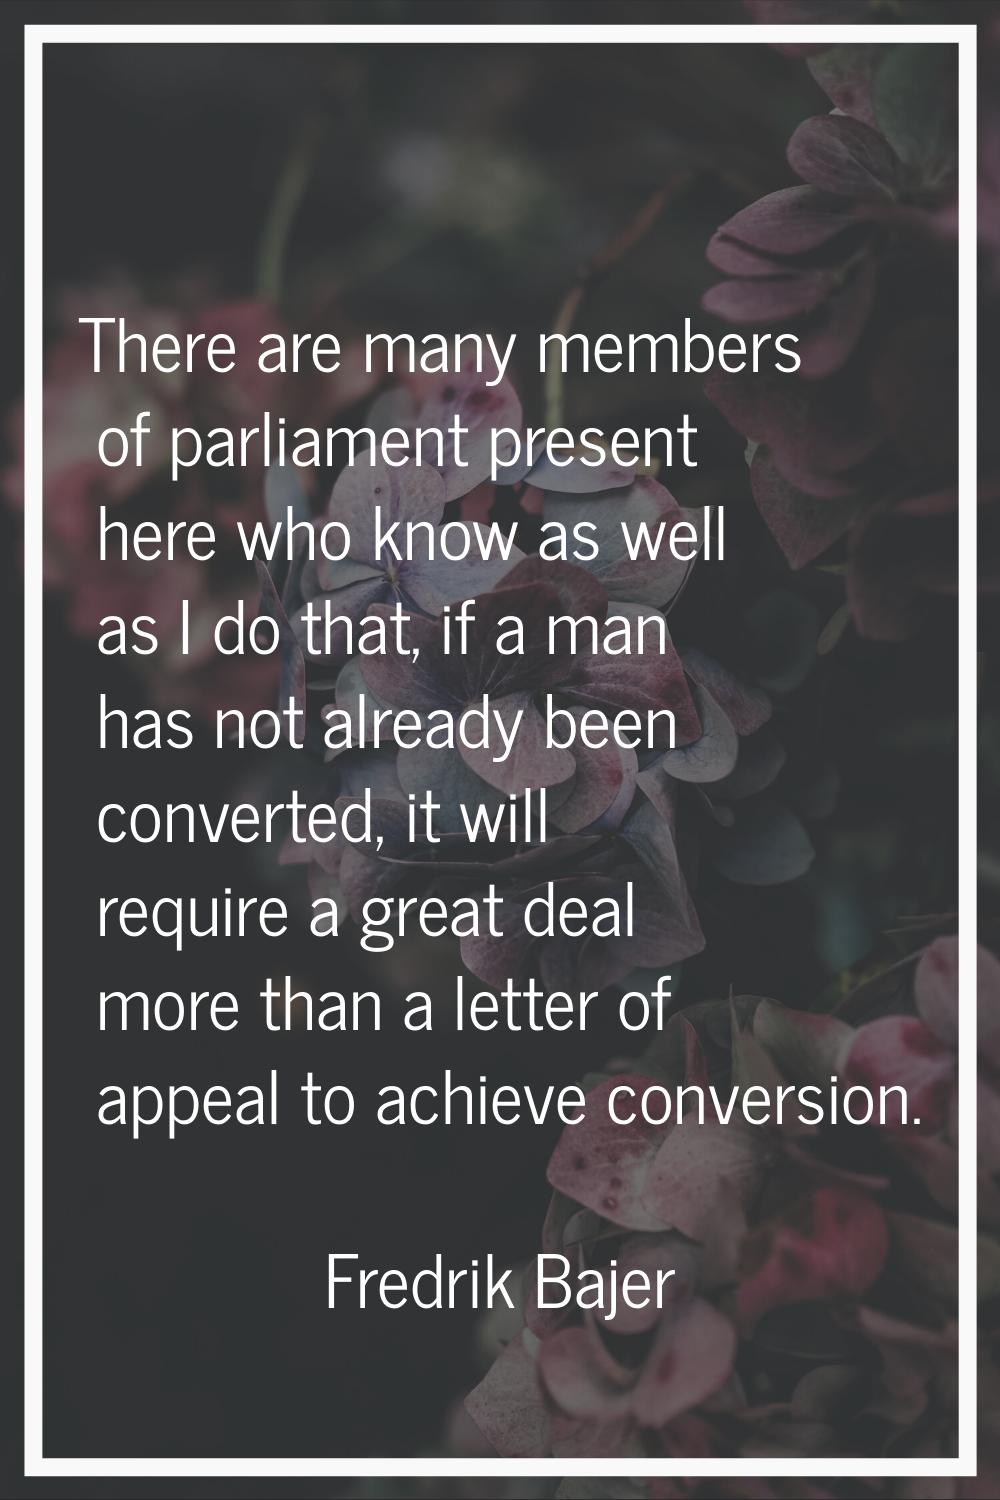 There are many members of parliament present here who know as well as I do that, if a man has not a